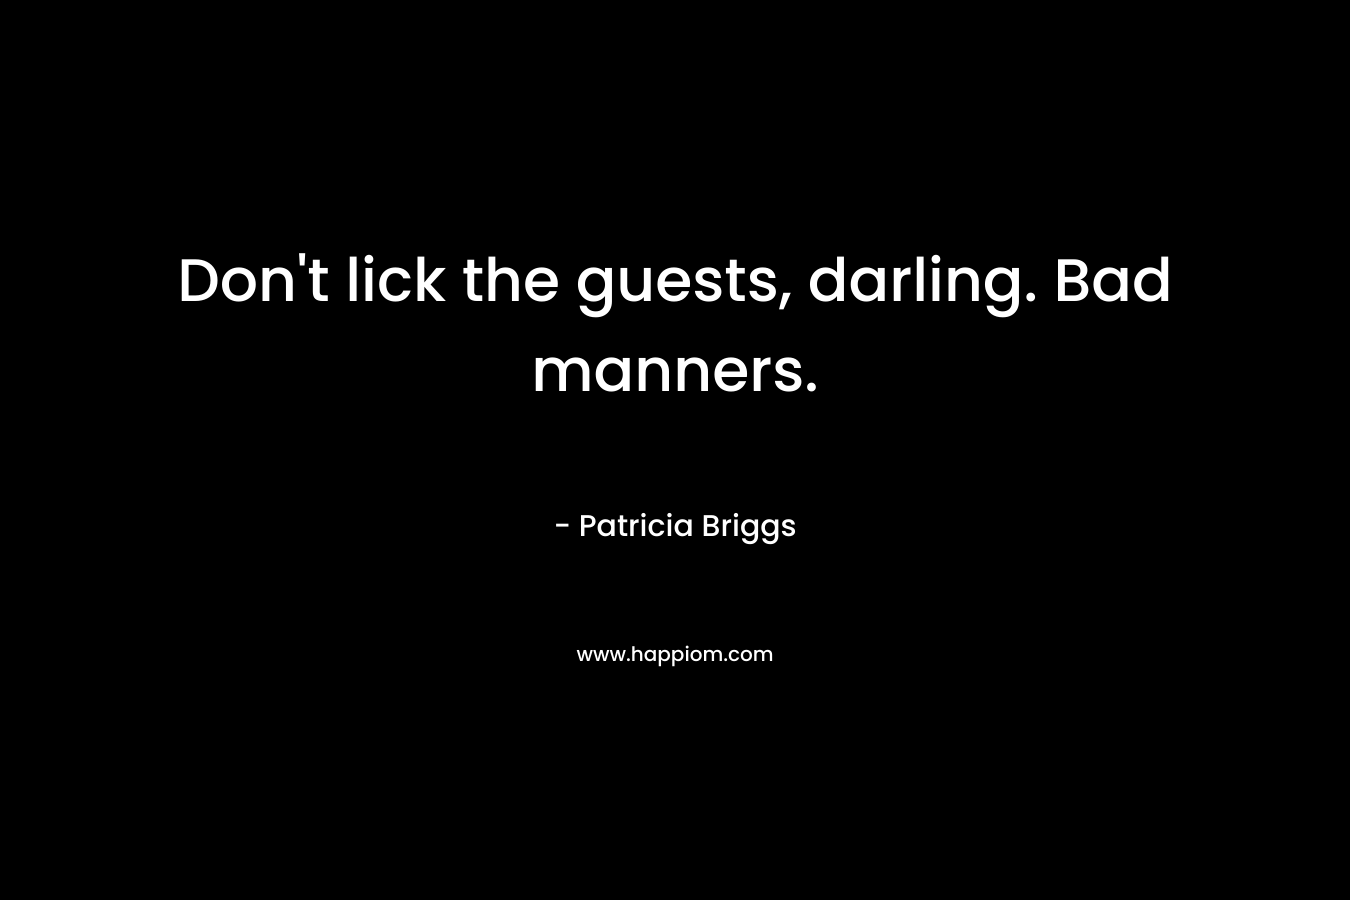 Don't lick the guests, darling. Bad manners.